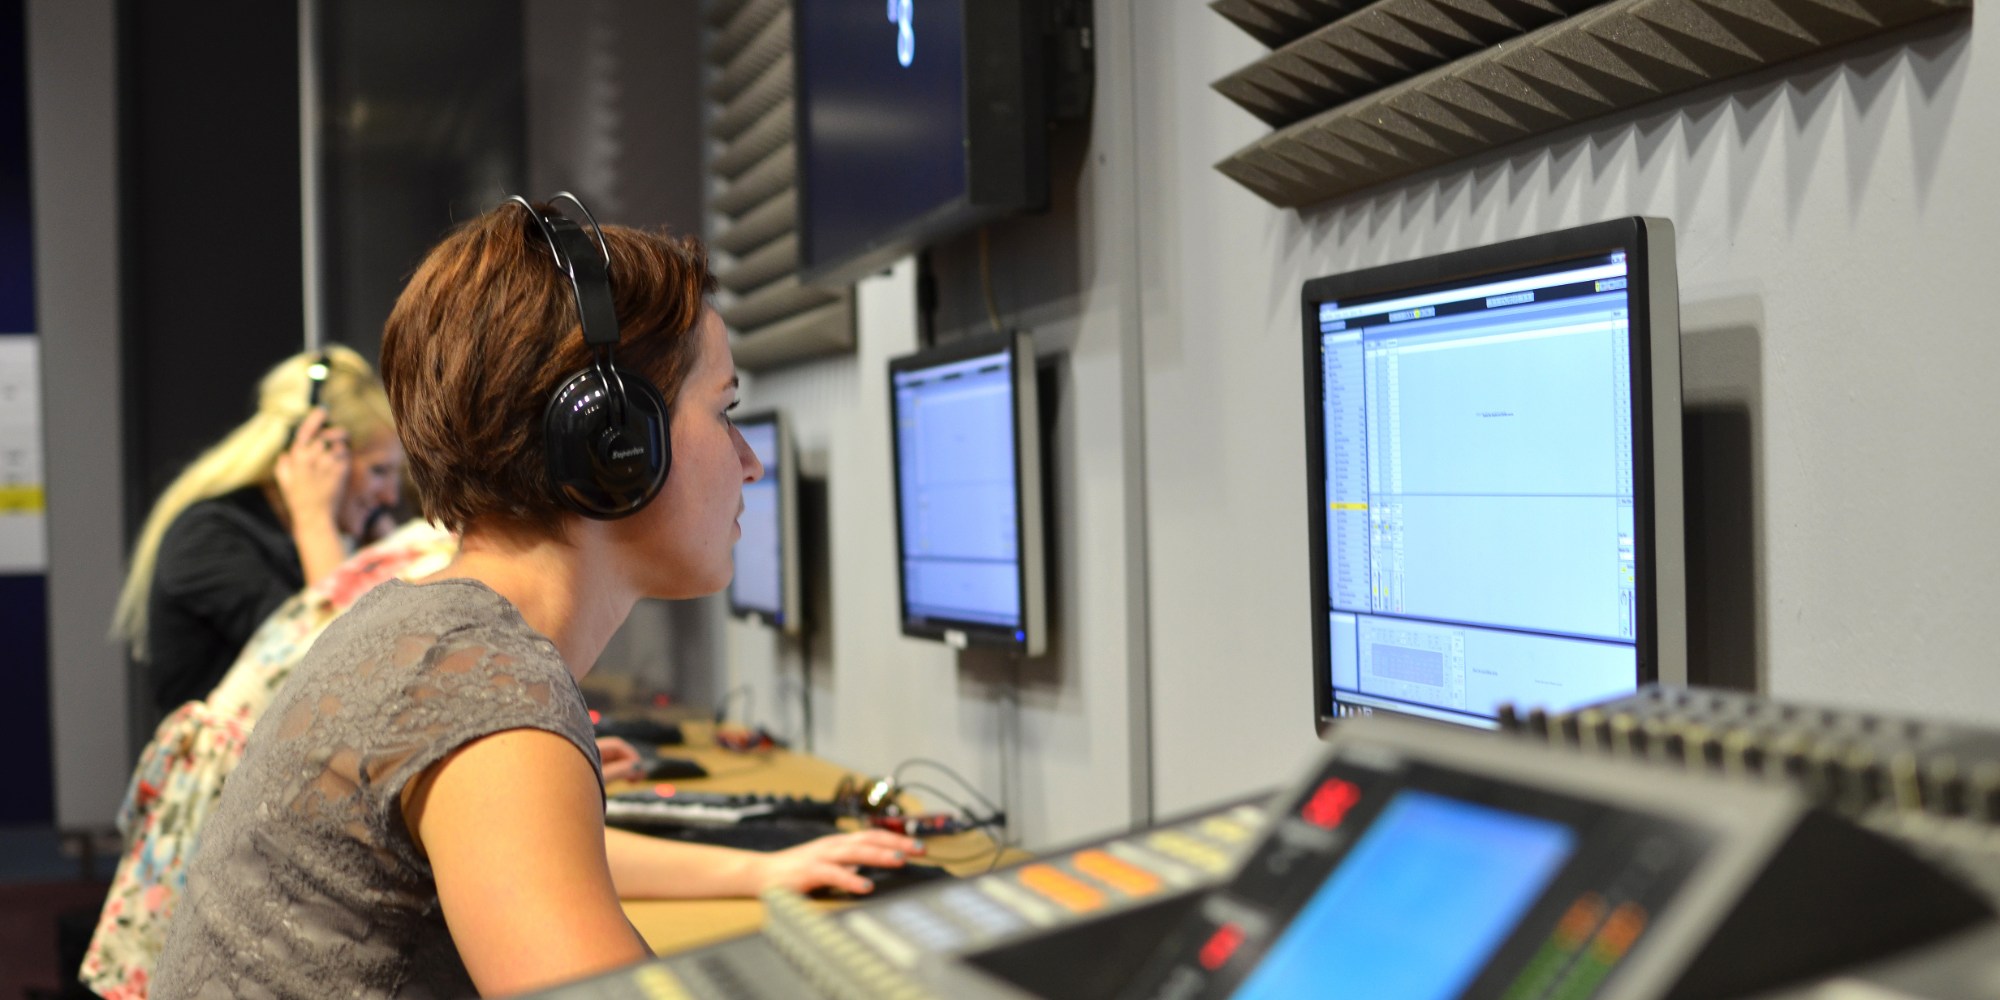 The soundlab at ars electronica center